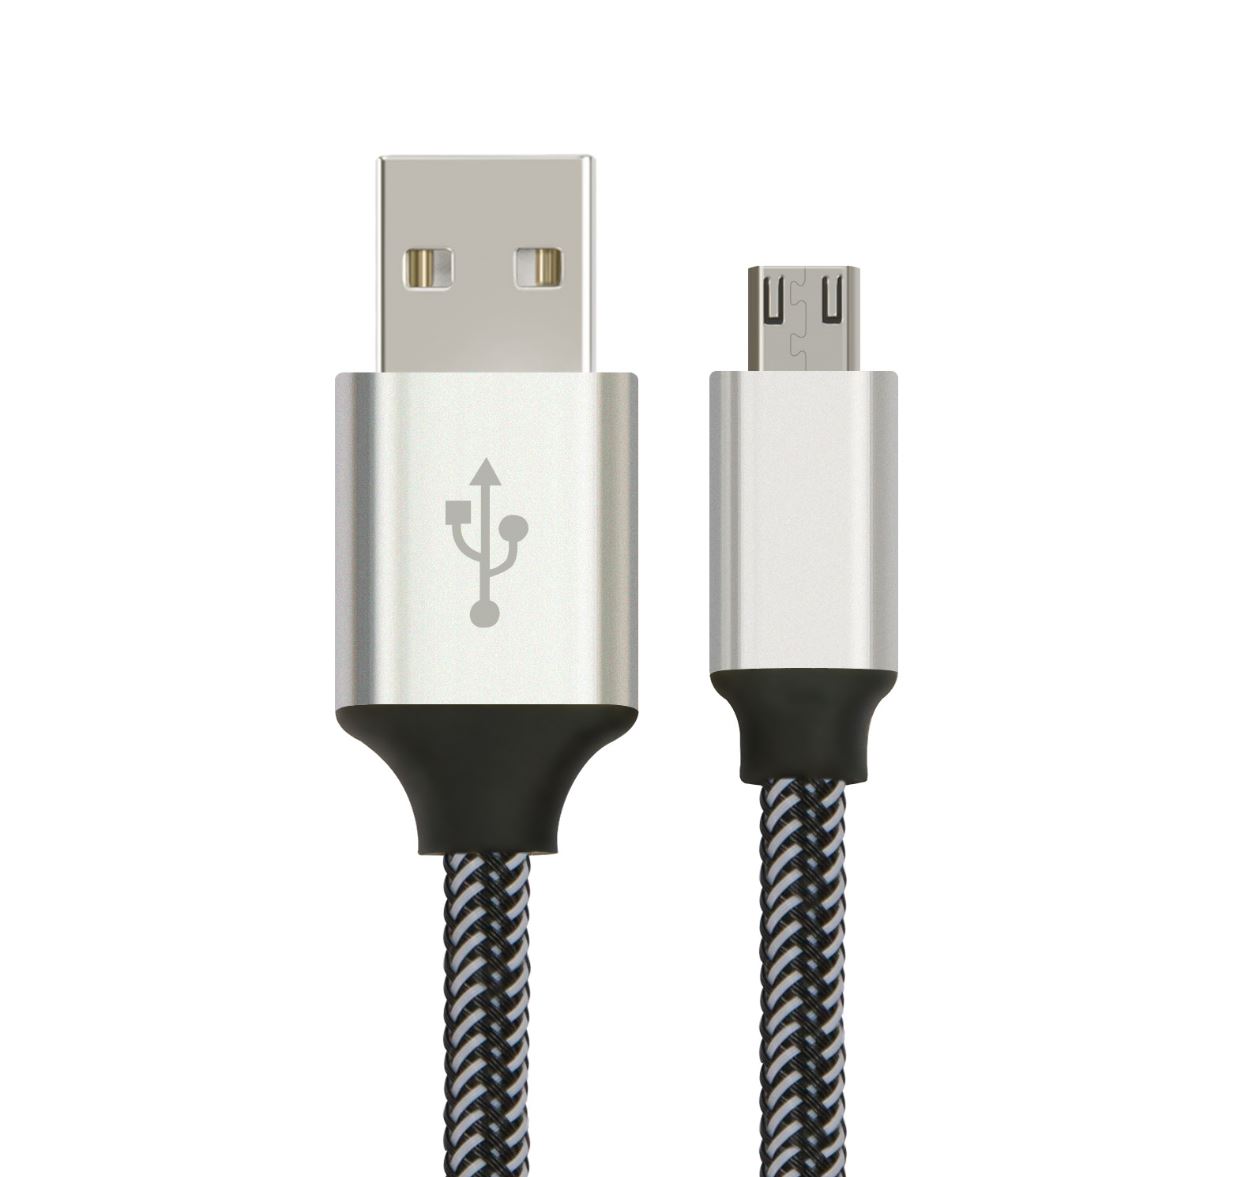 Astrotek, 2m, Micro, USB, Data, Sync, Charger, Cable, Cord, Silver, White, Color, for, Samsung, HTC, Motorola, Nokia, Kndle, Android, Phone, 